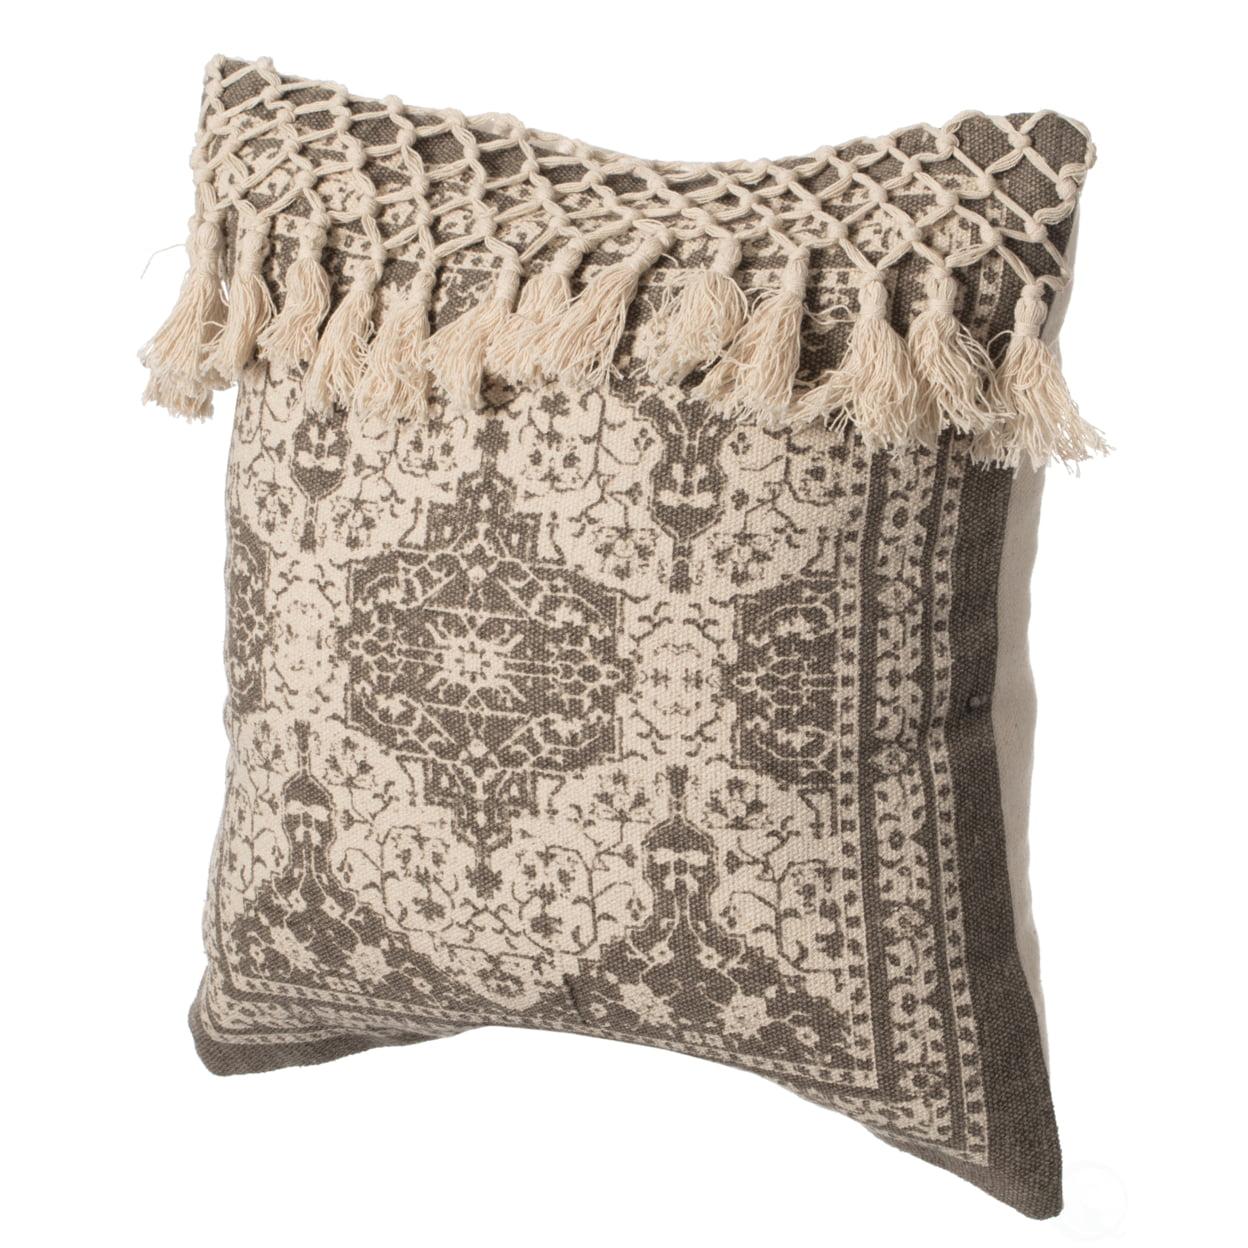 Handwoven Beige Cotton 16" Throw Pillow Cover with Tasseled Detail